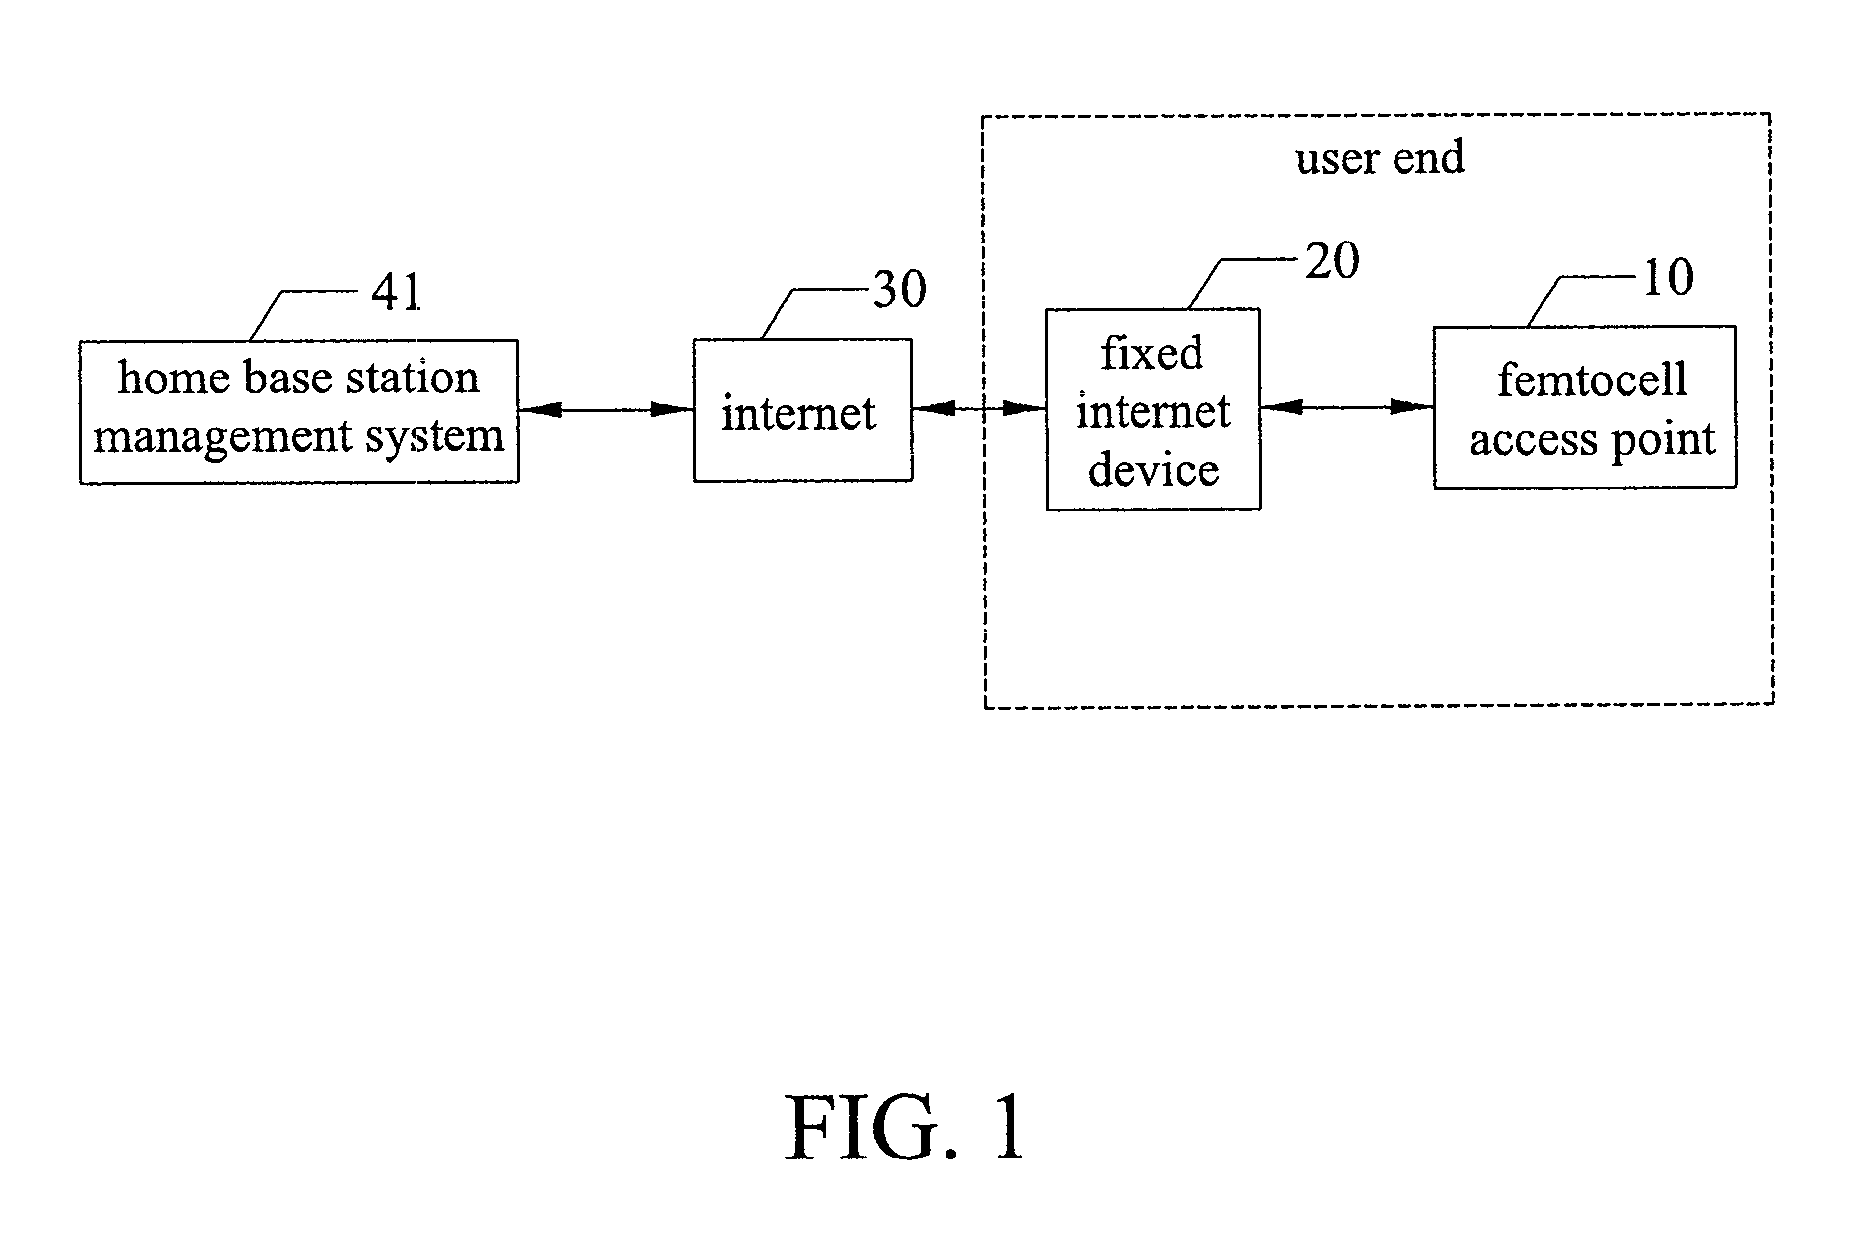 Method for controlling access at user end